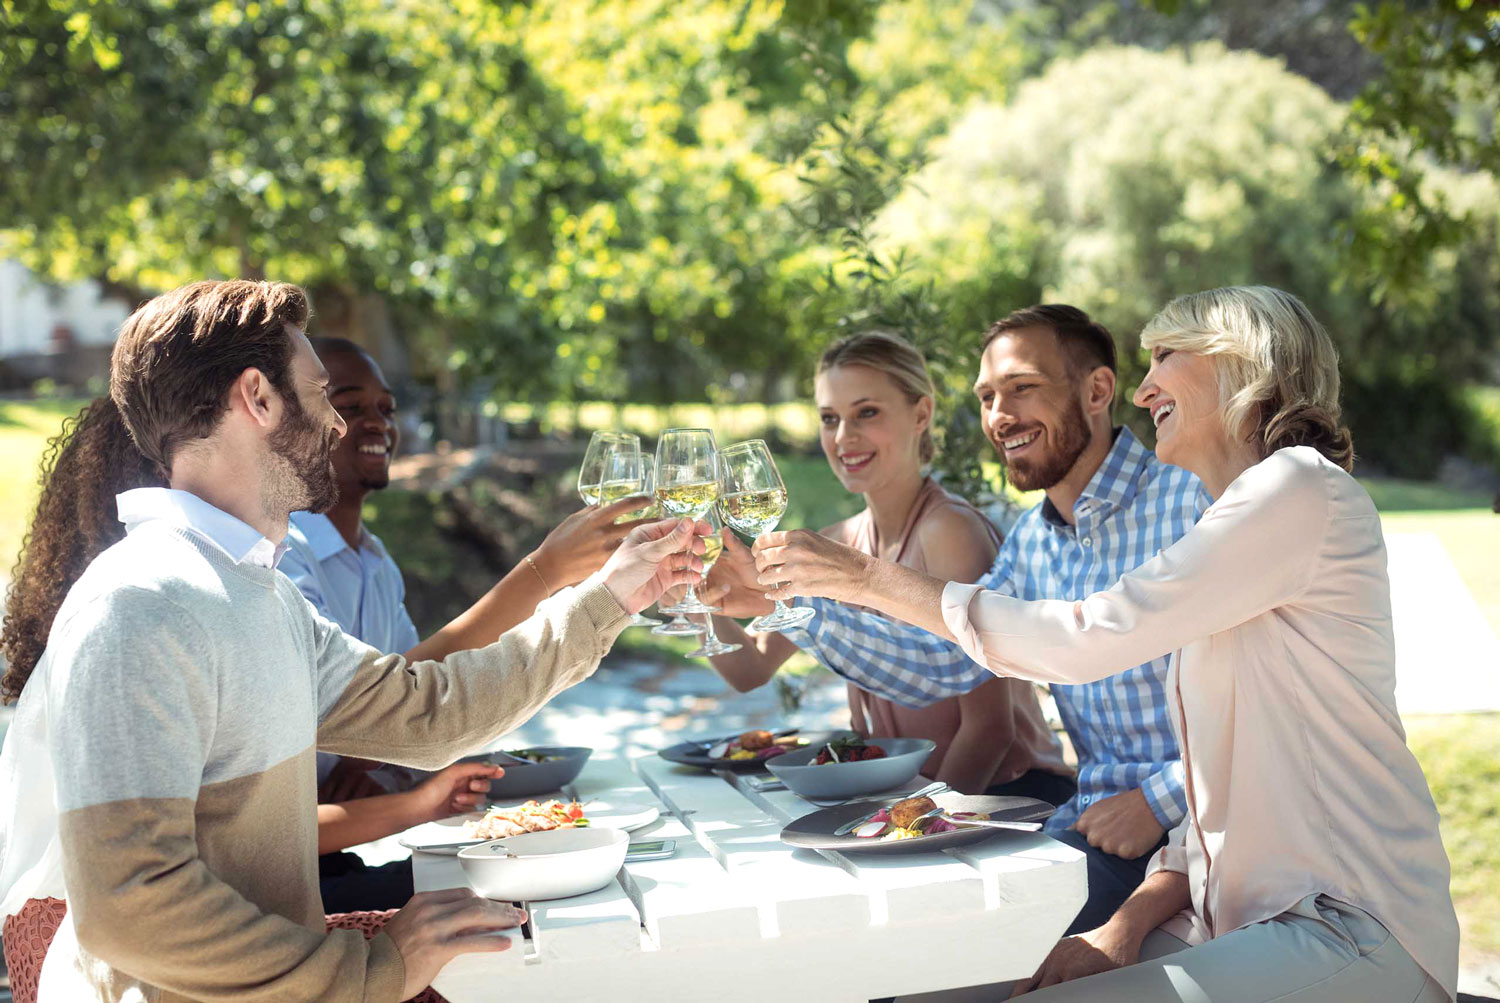 Group of friends toasting glasses of wine in a vineyard